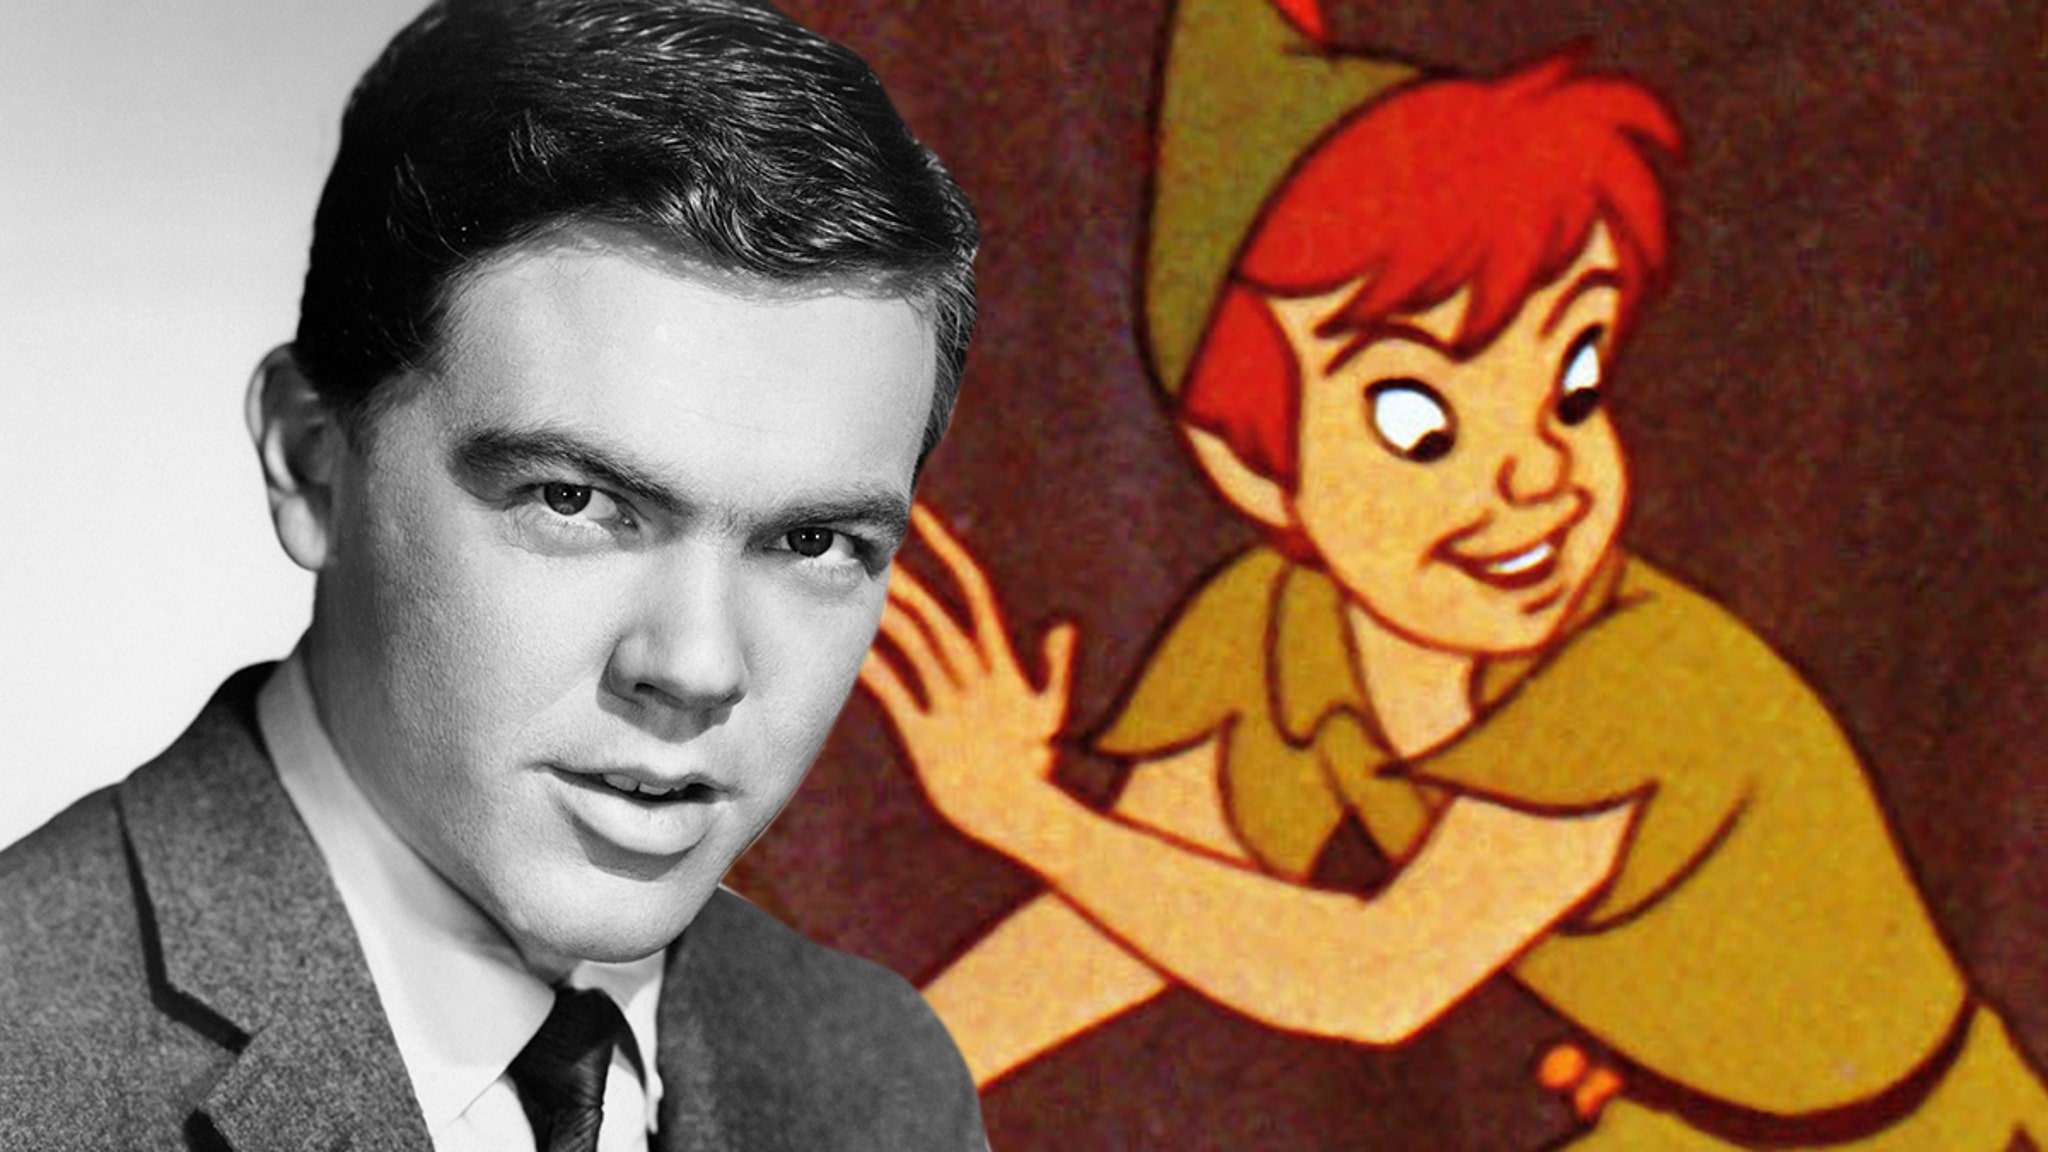 Peter Pan’s bow in ‘Rescue Rangers’ compared to Bobby Driscoll Tragedy